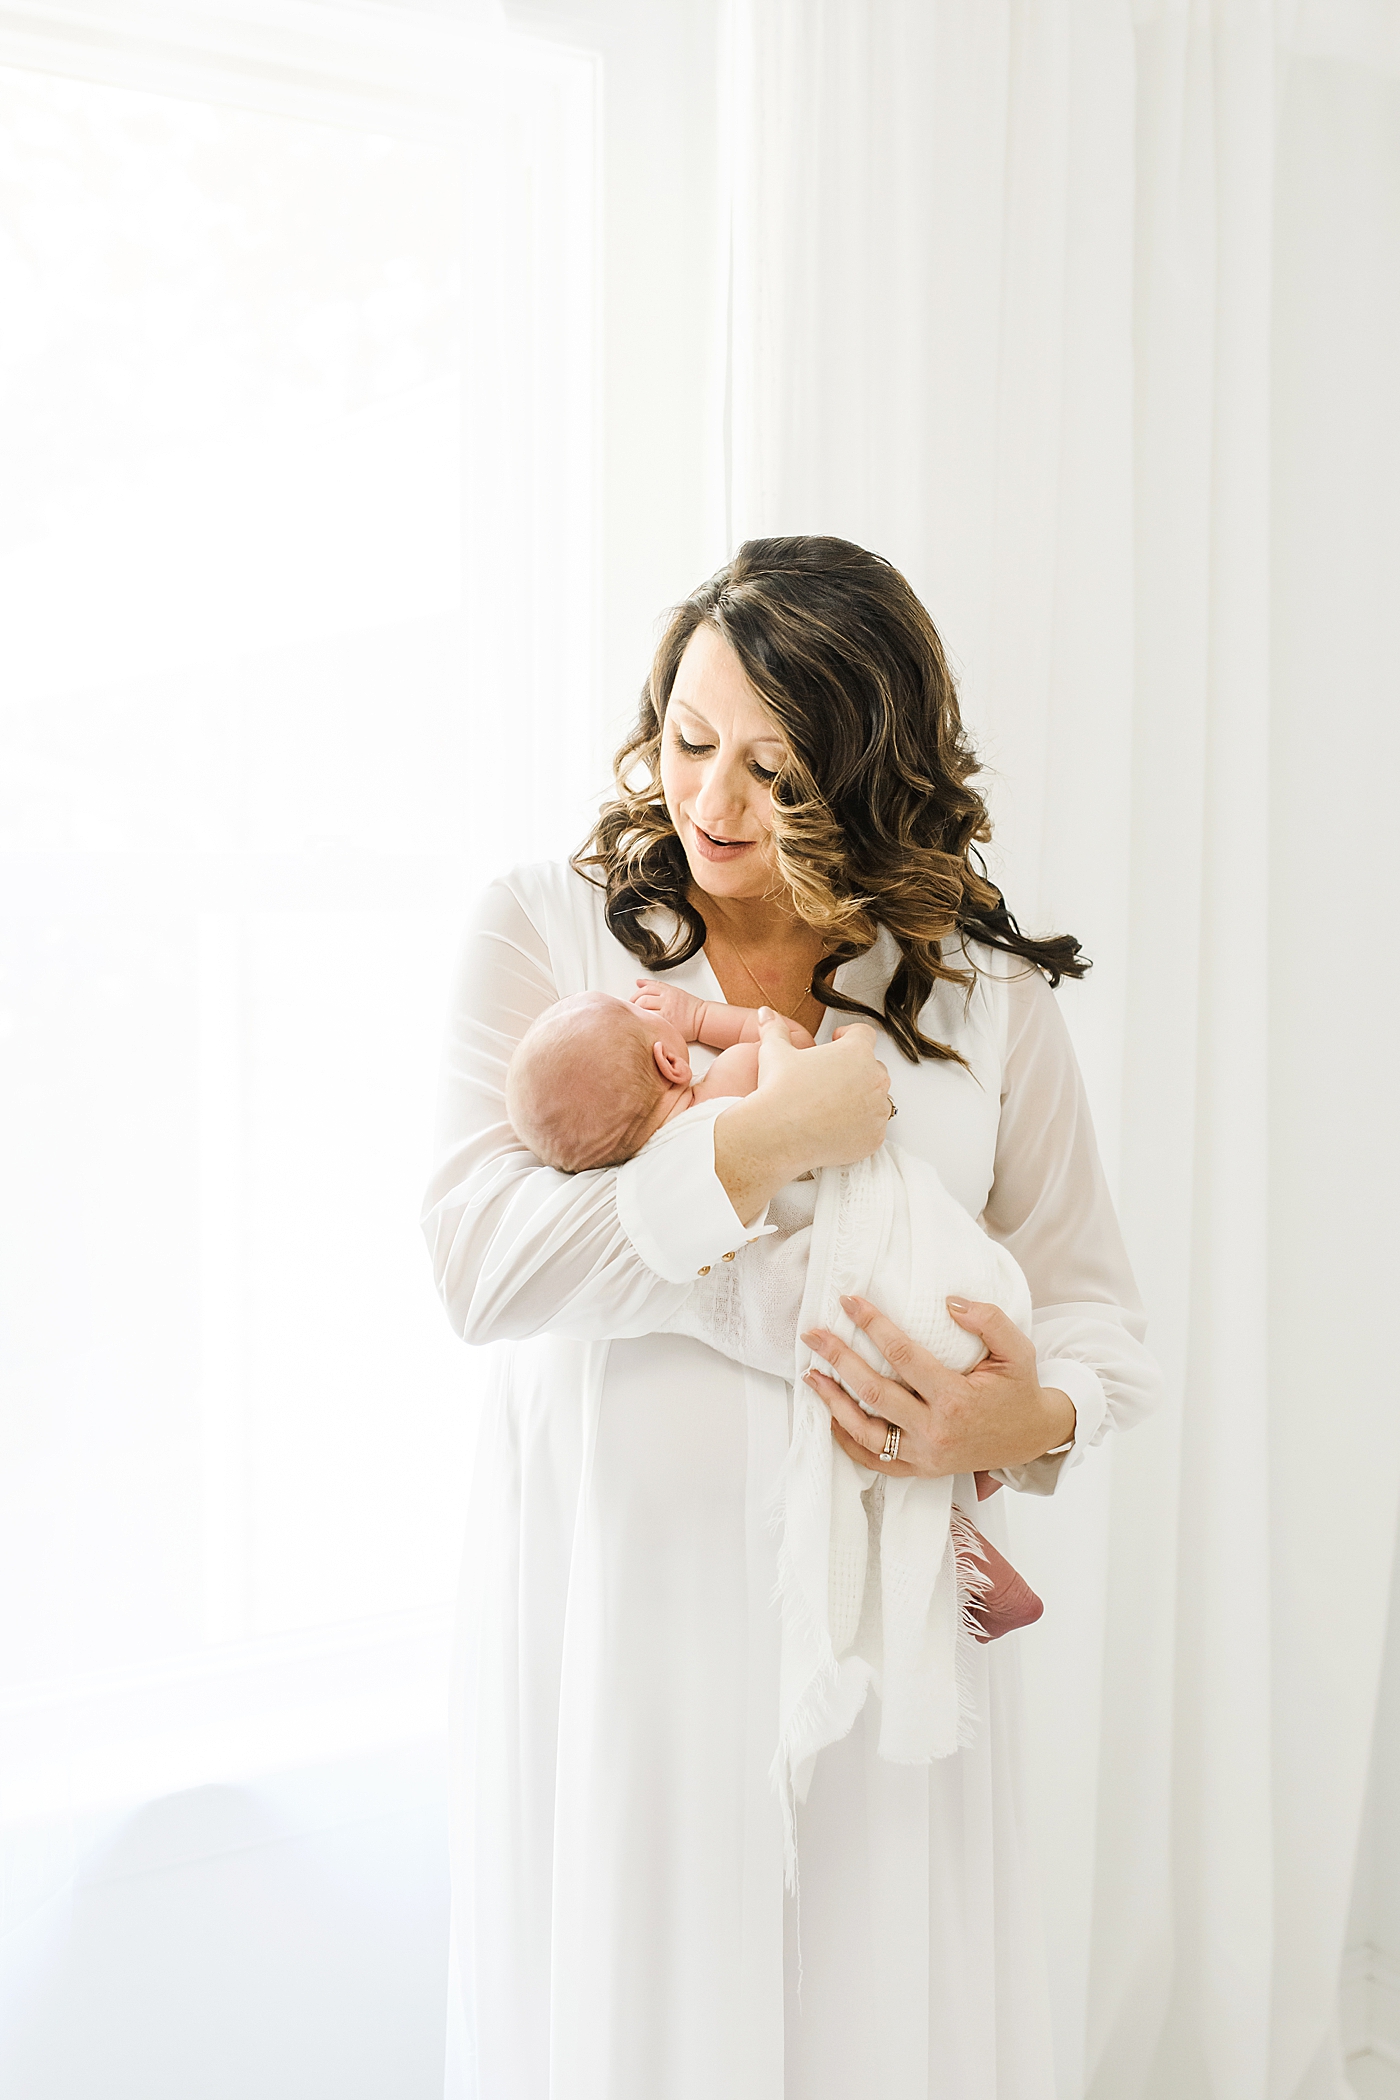 Mom in long white dress holding her new baby | Anna Wisjo Photography - Baby Photographer Charlotte